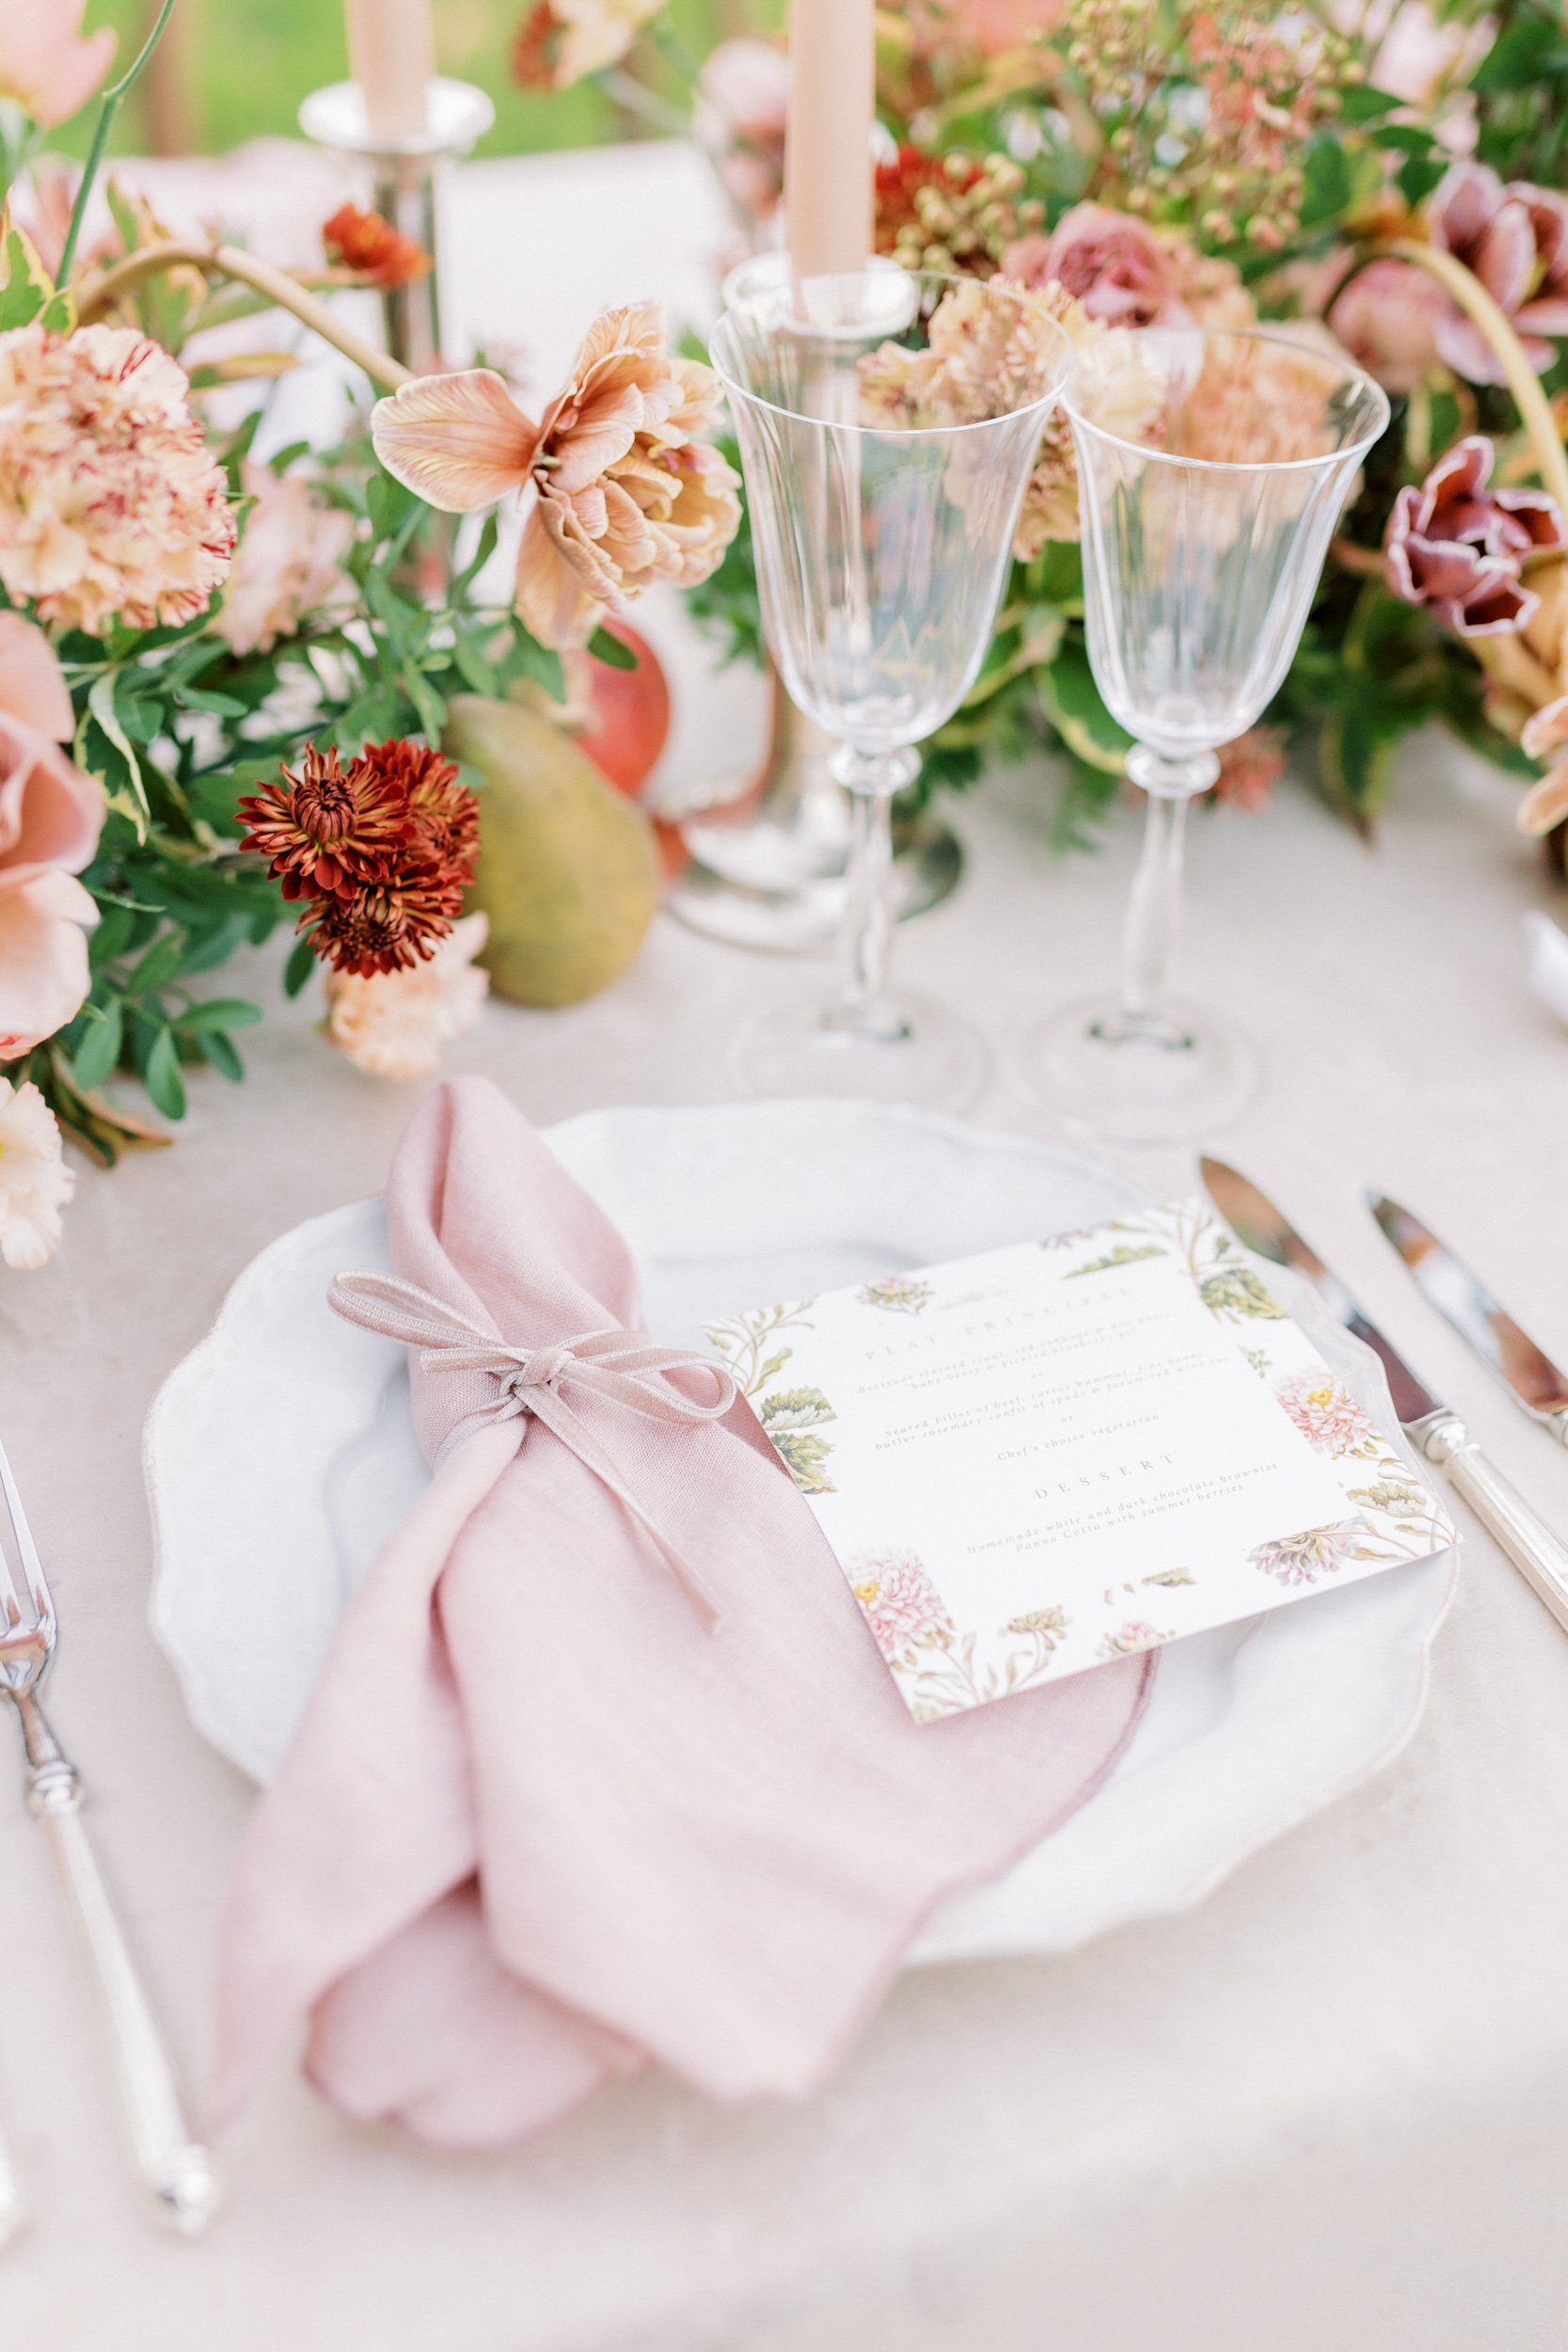 A wedding table setting with pink napkins and pretty flowers at Chateau de Courtomer.